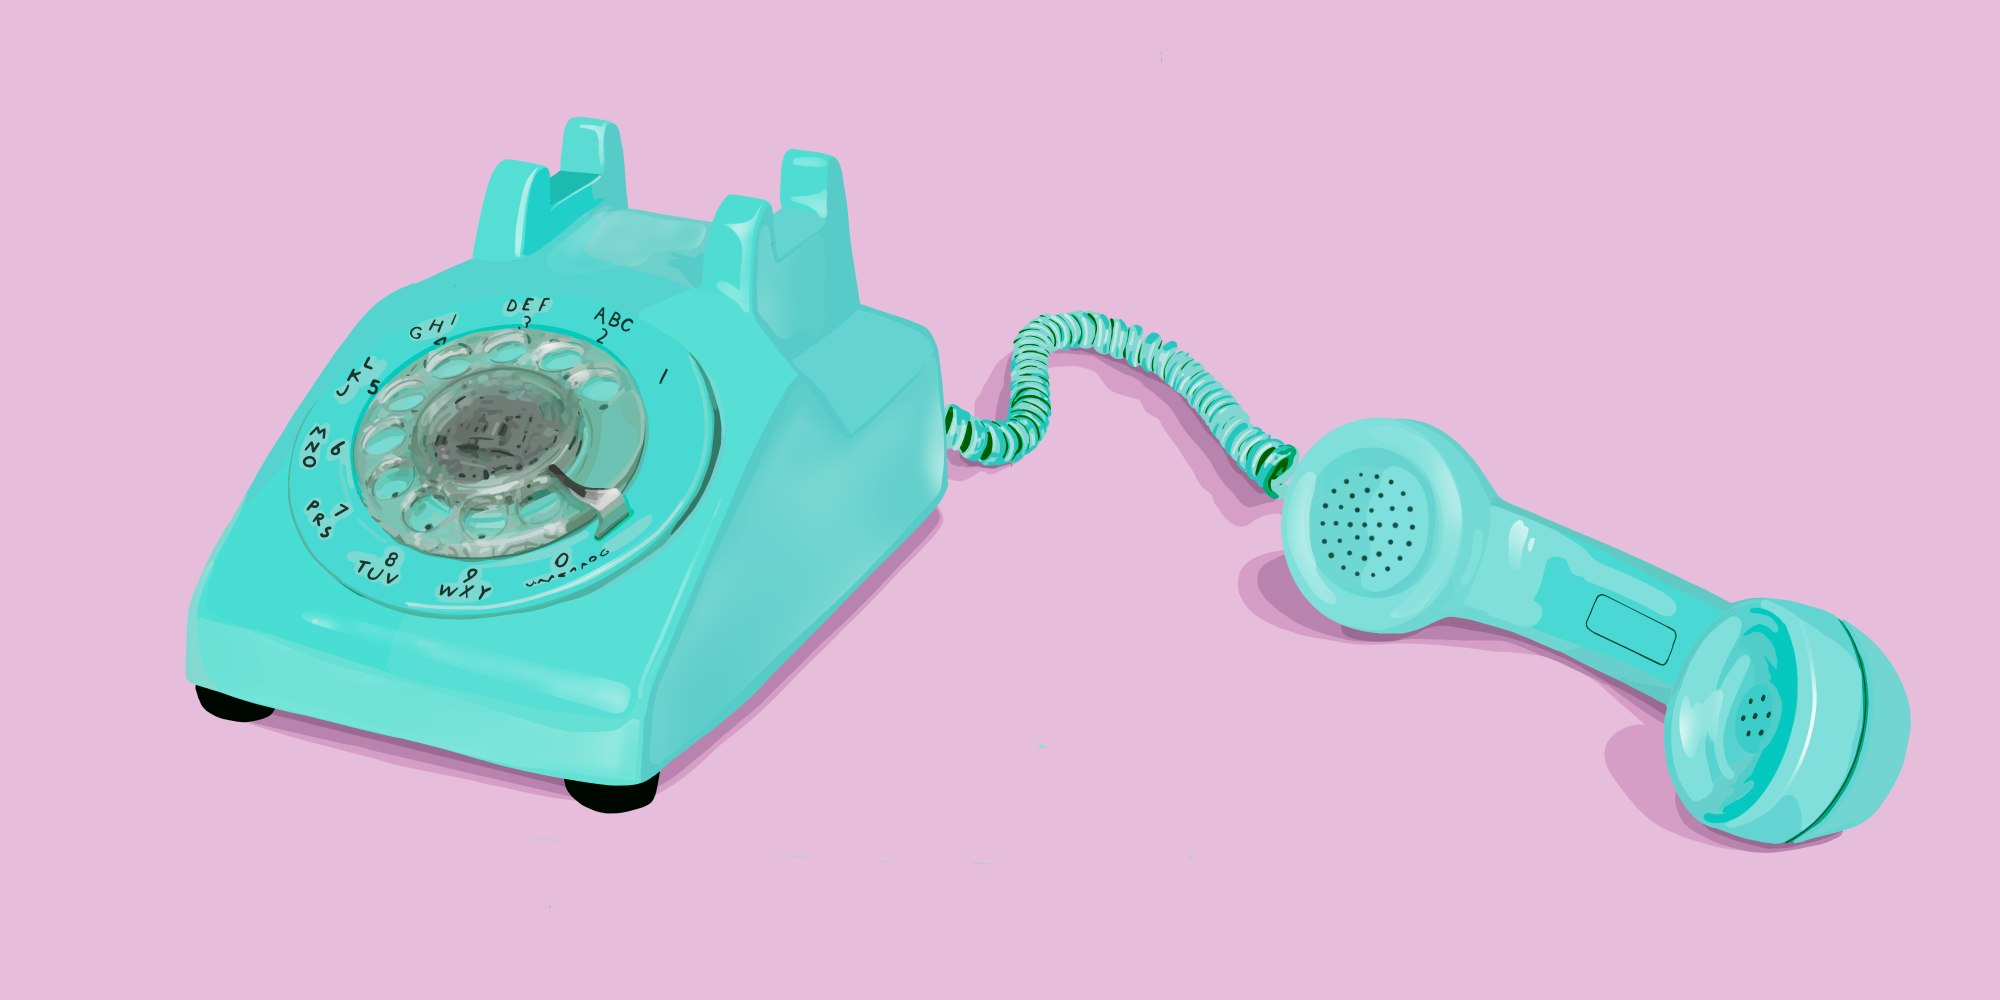 Rotary telephone with receiver off the hook